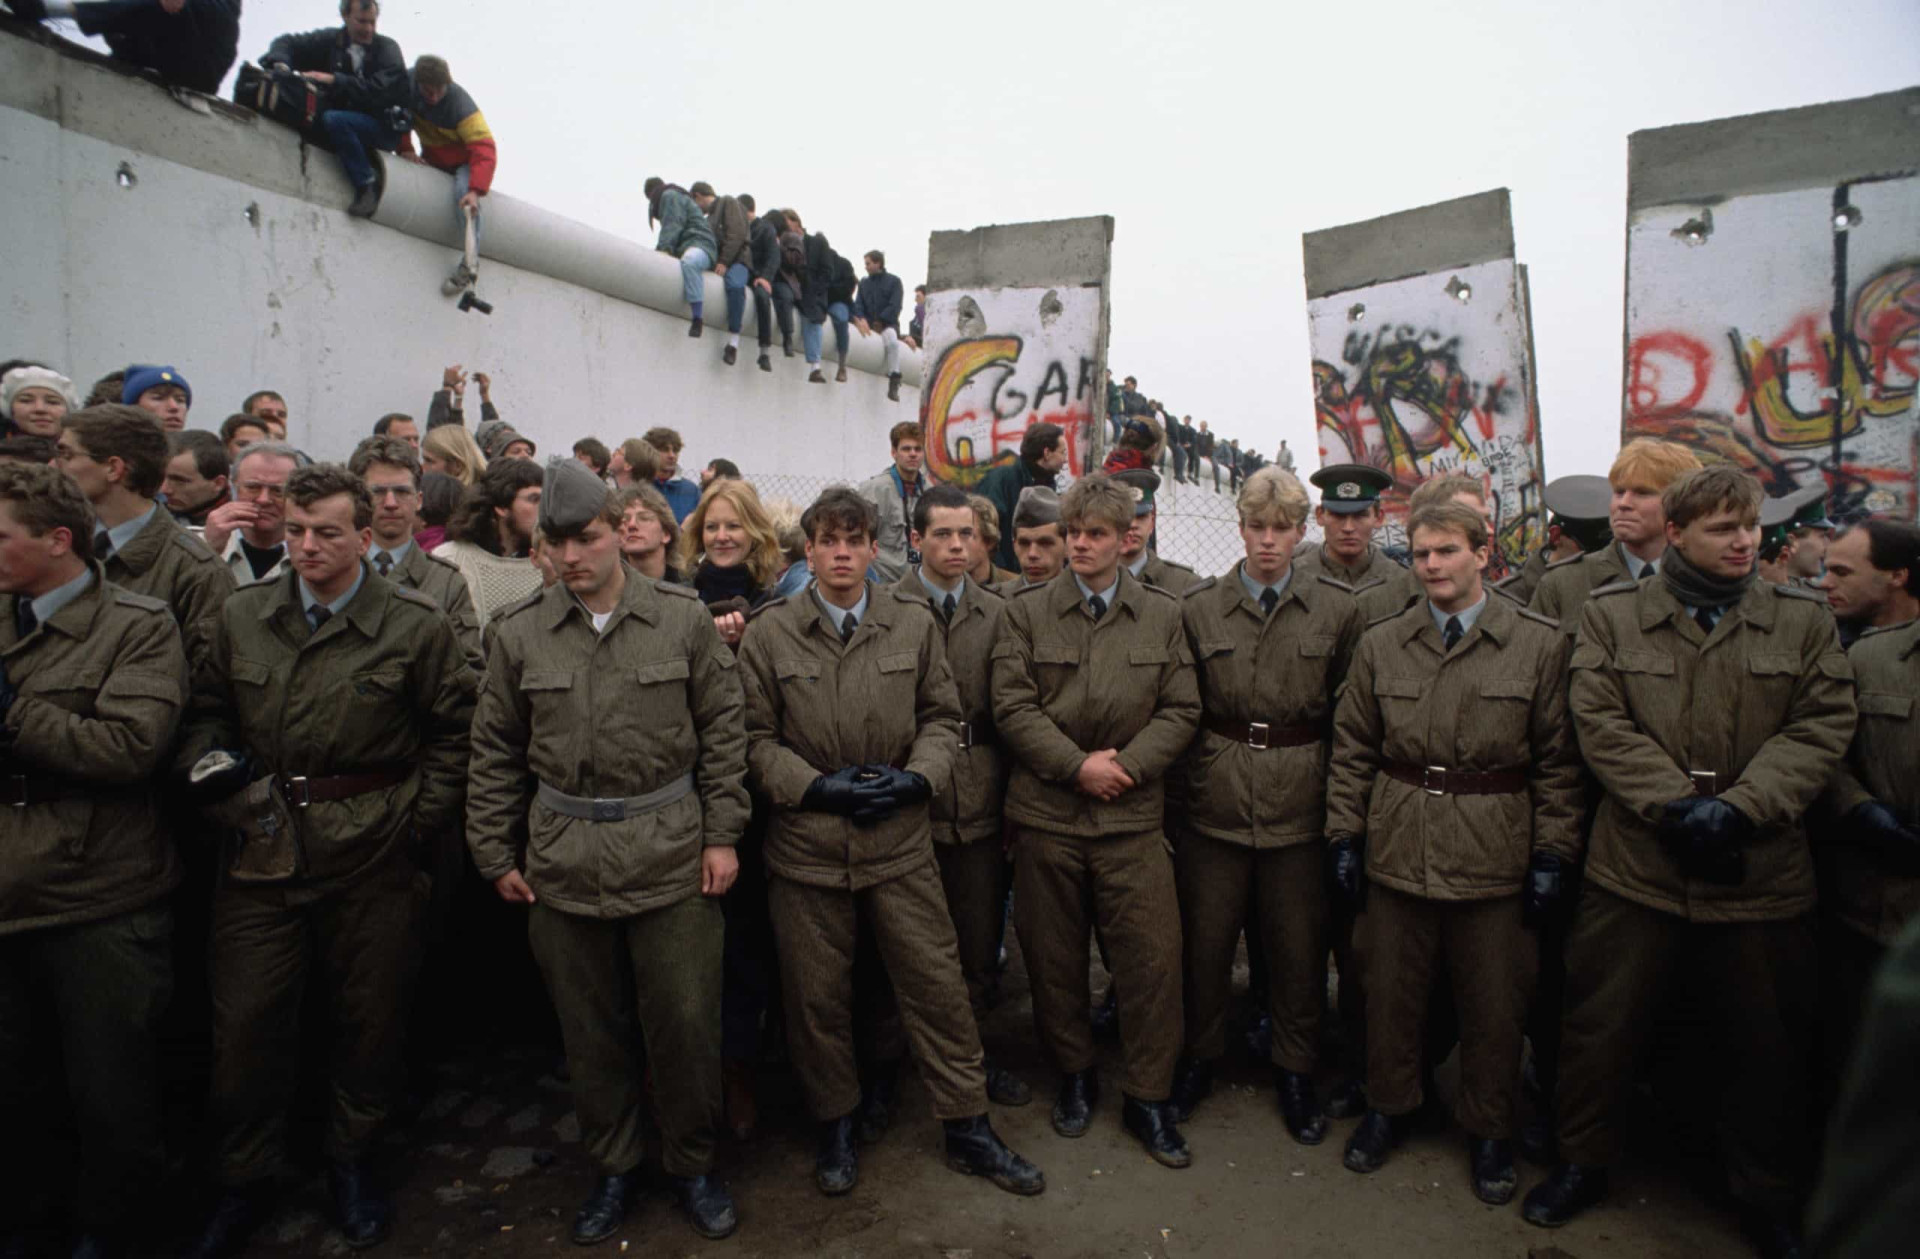 <p>The fall of the Berlin Wall on November 1990 and the Iron Curtain, along with the reunification of Germany, sees the beginning of the end of the Cold War.</p><p><a href="https://www.msn.com/en-us/community/channel/vid-7xx8mnucu55yw63we9va2gwr7uihbxwc68fxqp25x6tg4ftibpra?cvid=94631541bc0f4f89bfd59158d696ad7e">Follow us and access great exclusive content every day</a></p>